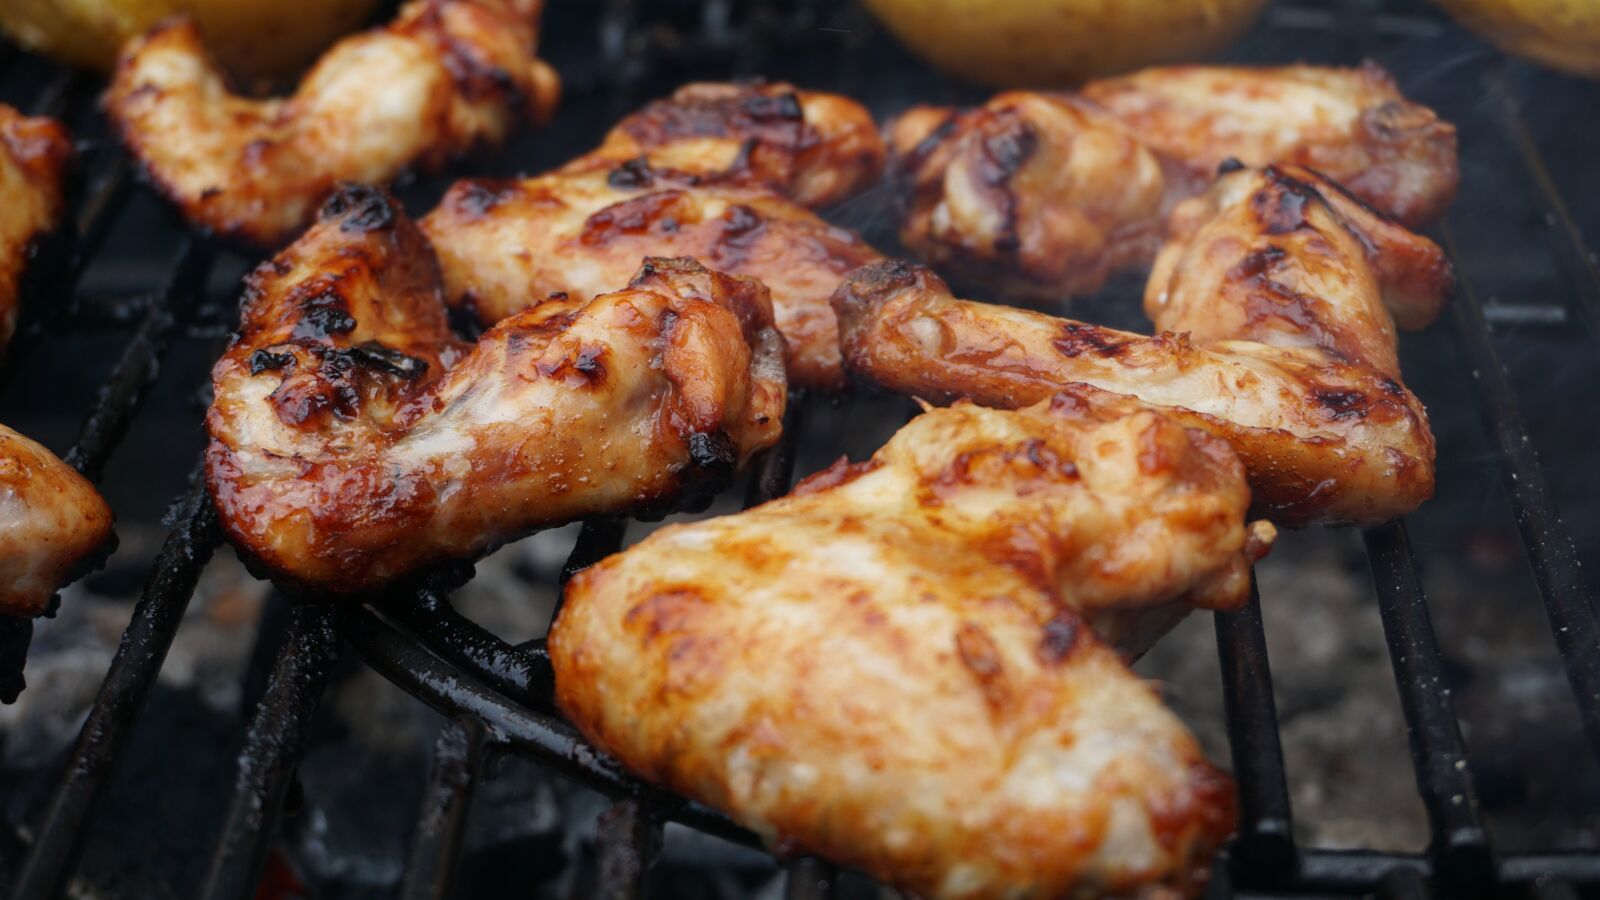 Sony a6000 sample photo. Barbecue, chicken wings, bbq photography